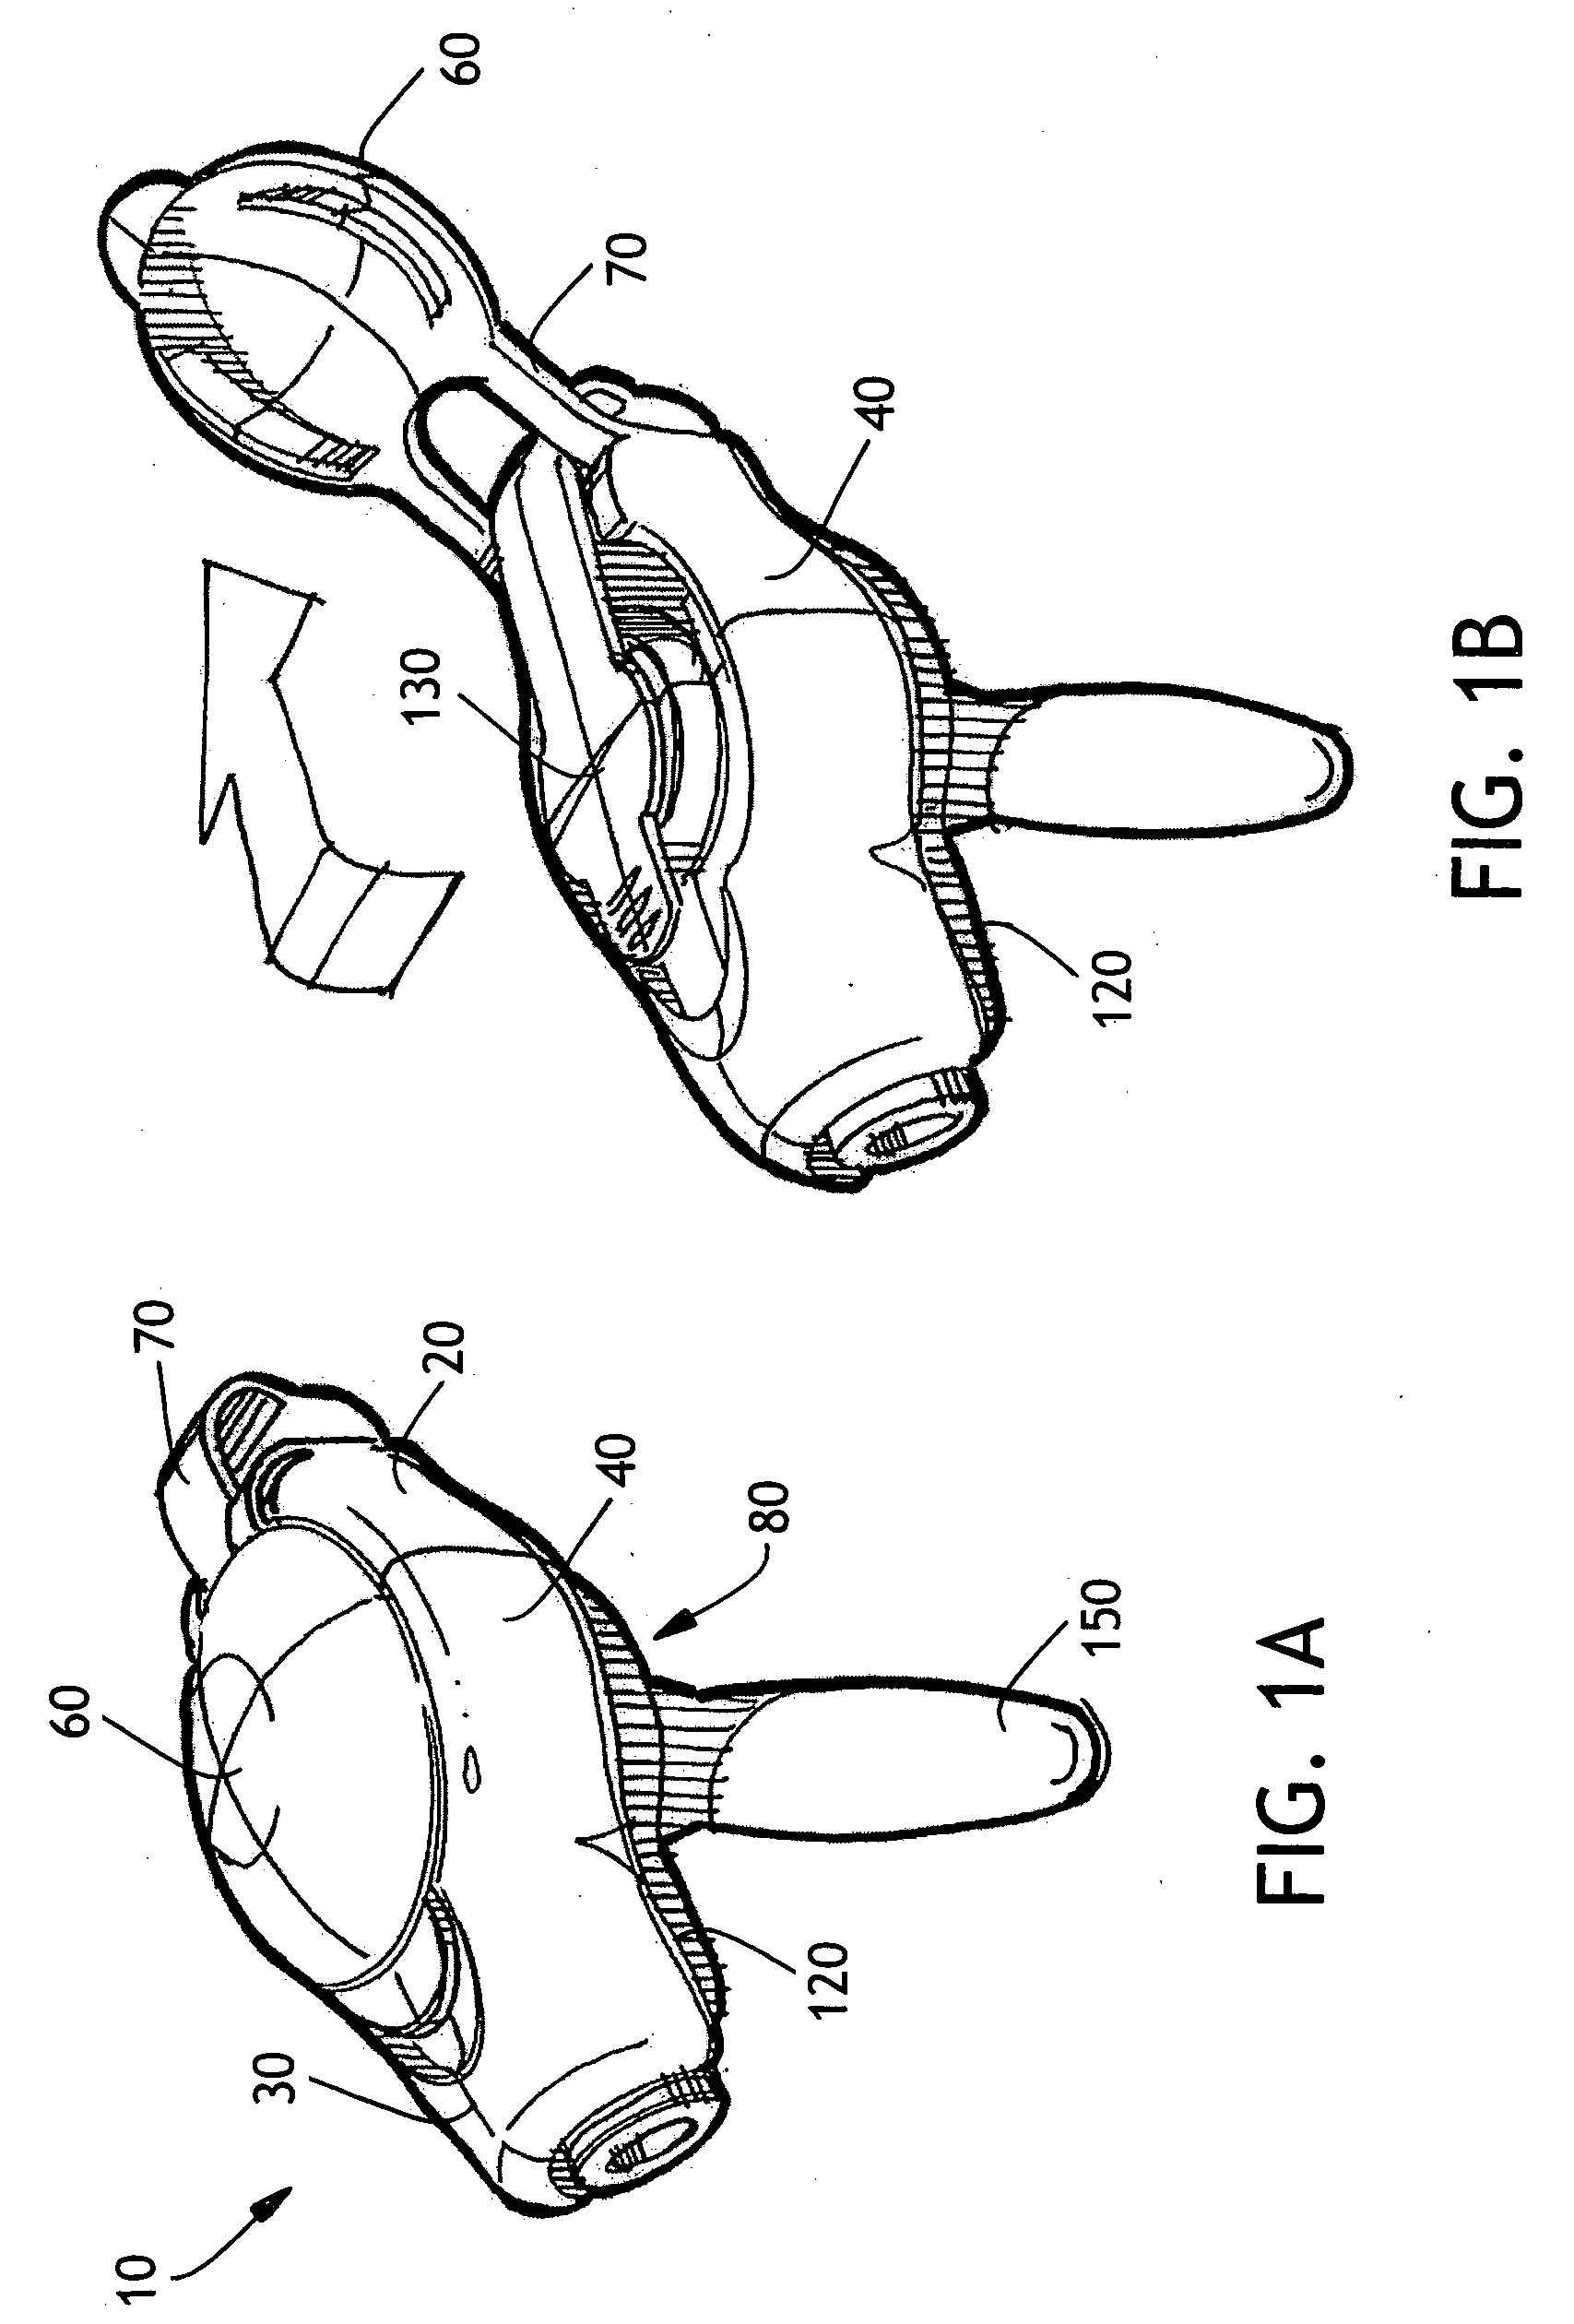 Designer accessory for use with an intracorporeal medical device